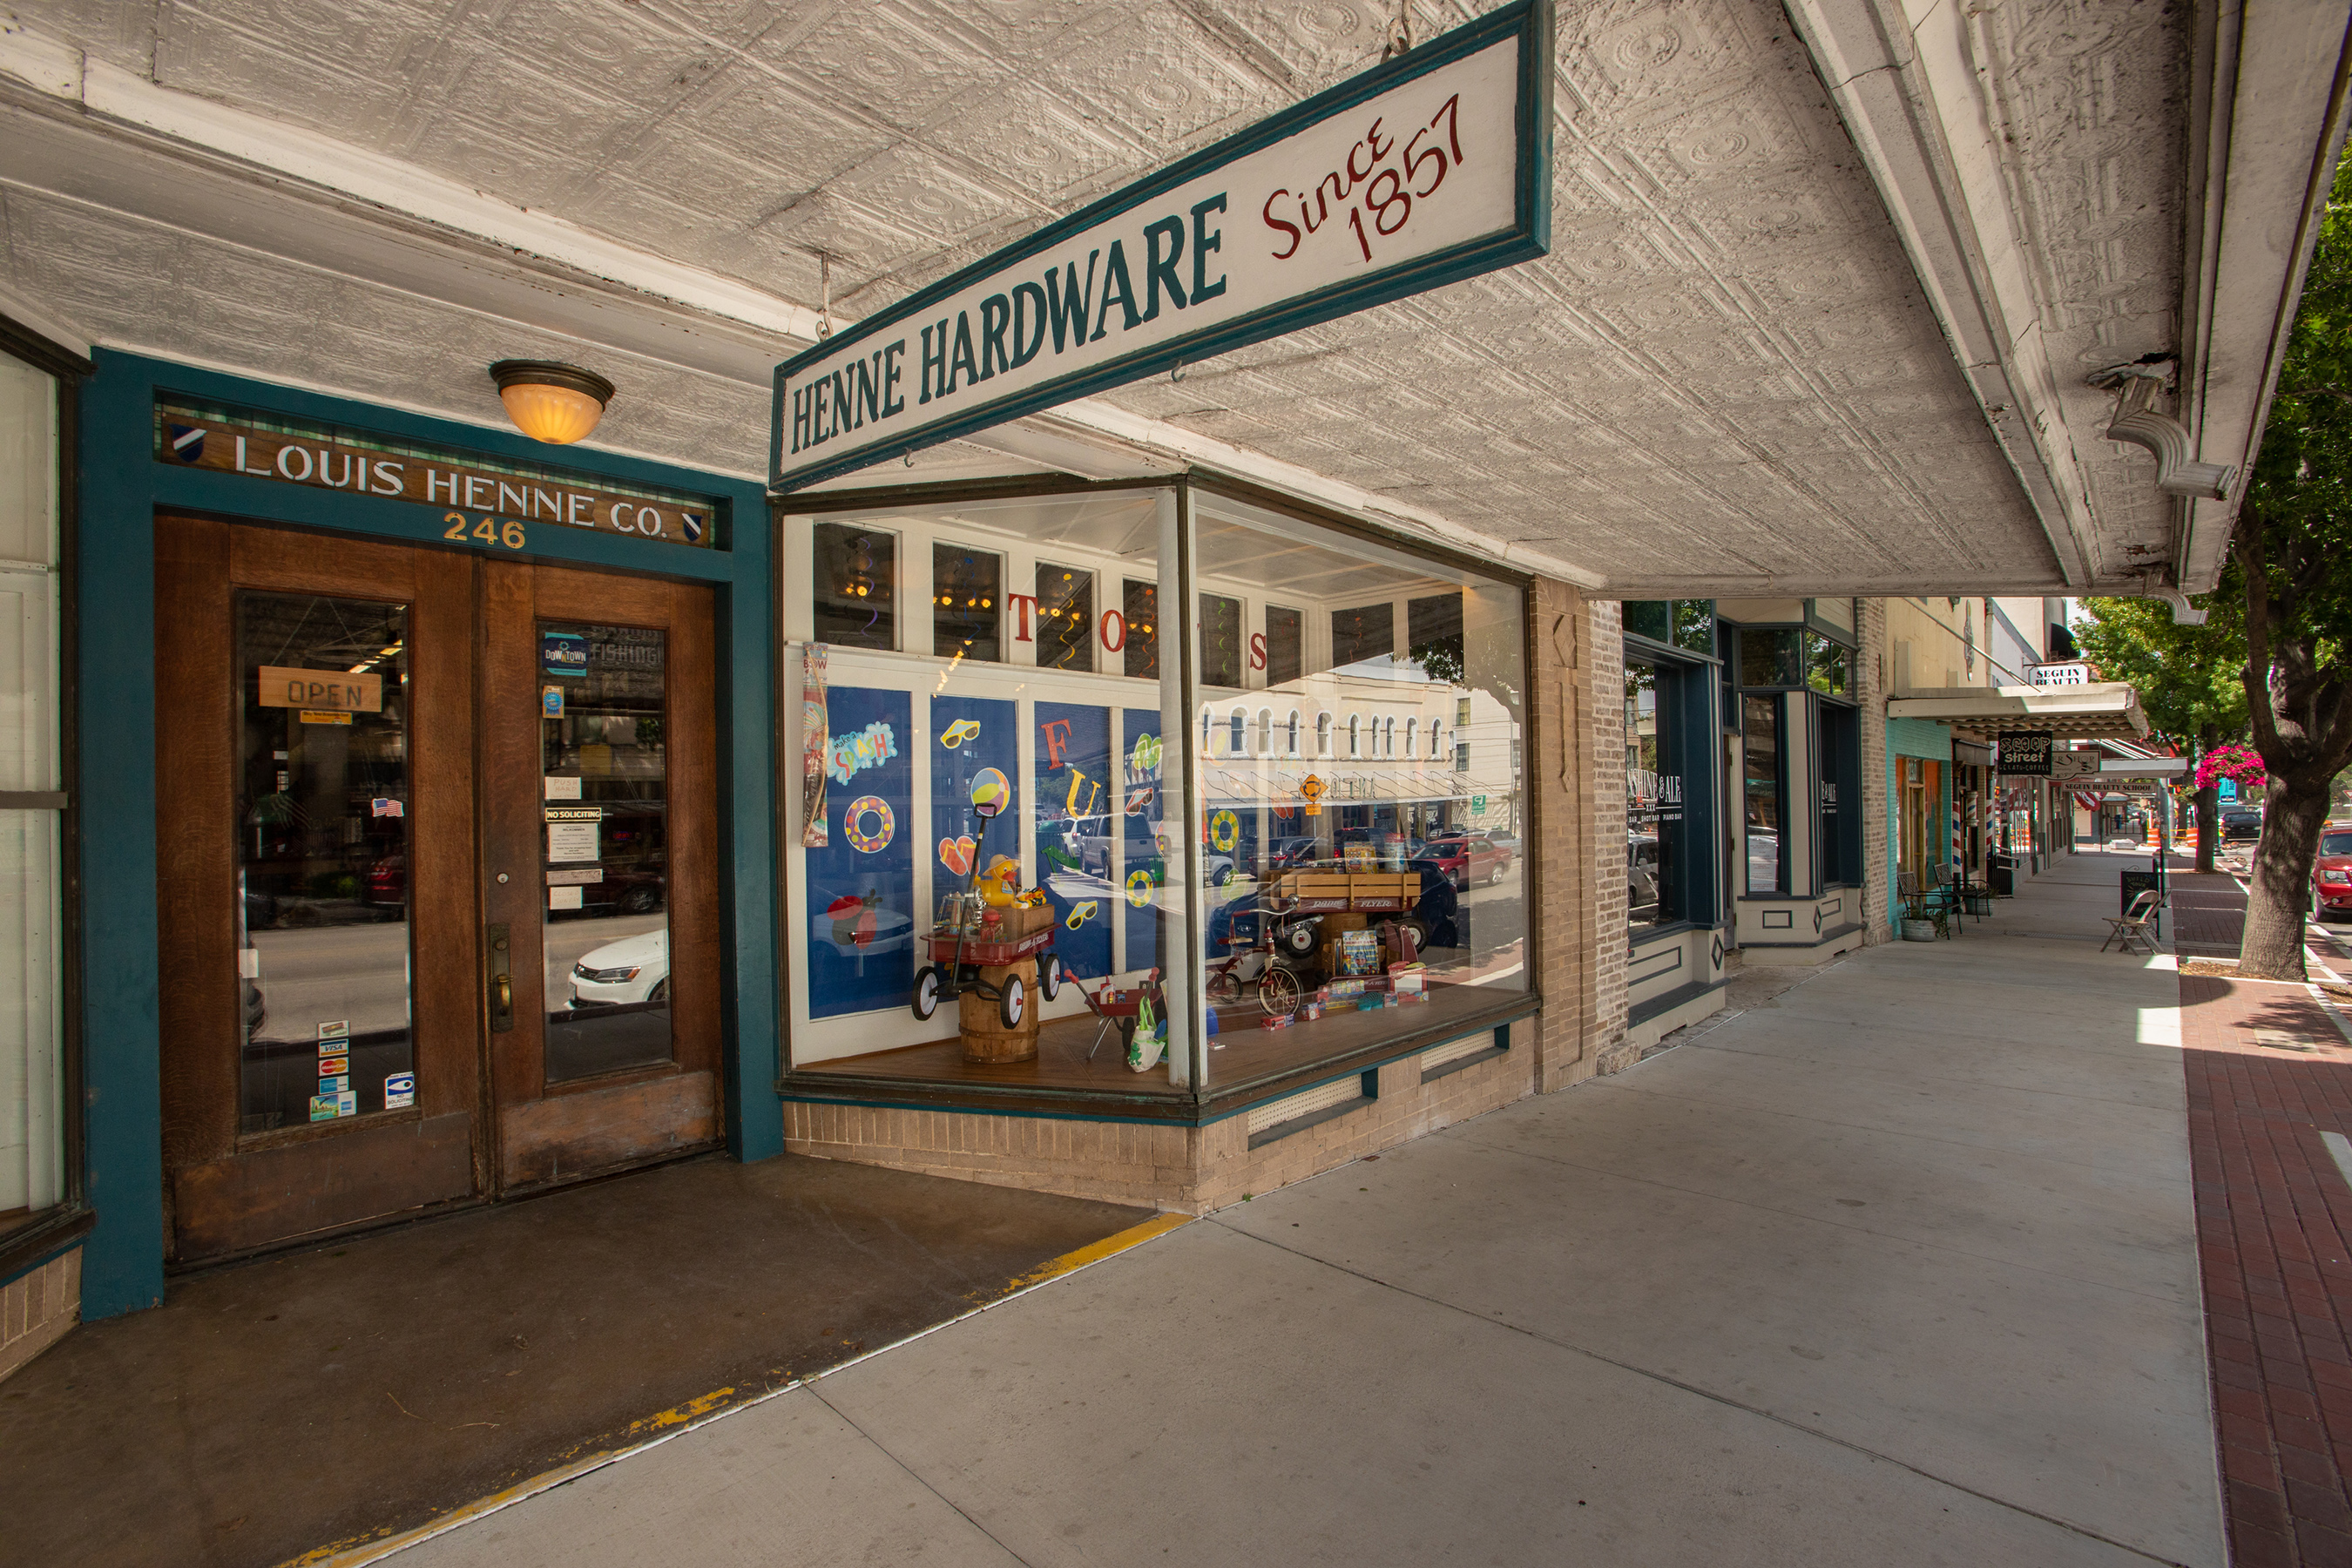 Downtown New Braunfels provides a mix of art galleries, museums, antique shops, boutiques, eateries and live music venues. Opened in the 1850’s, Henne Hardware is the oldest, continuous operating hardware store in Texas.